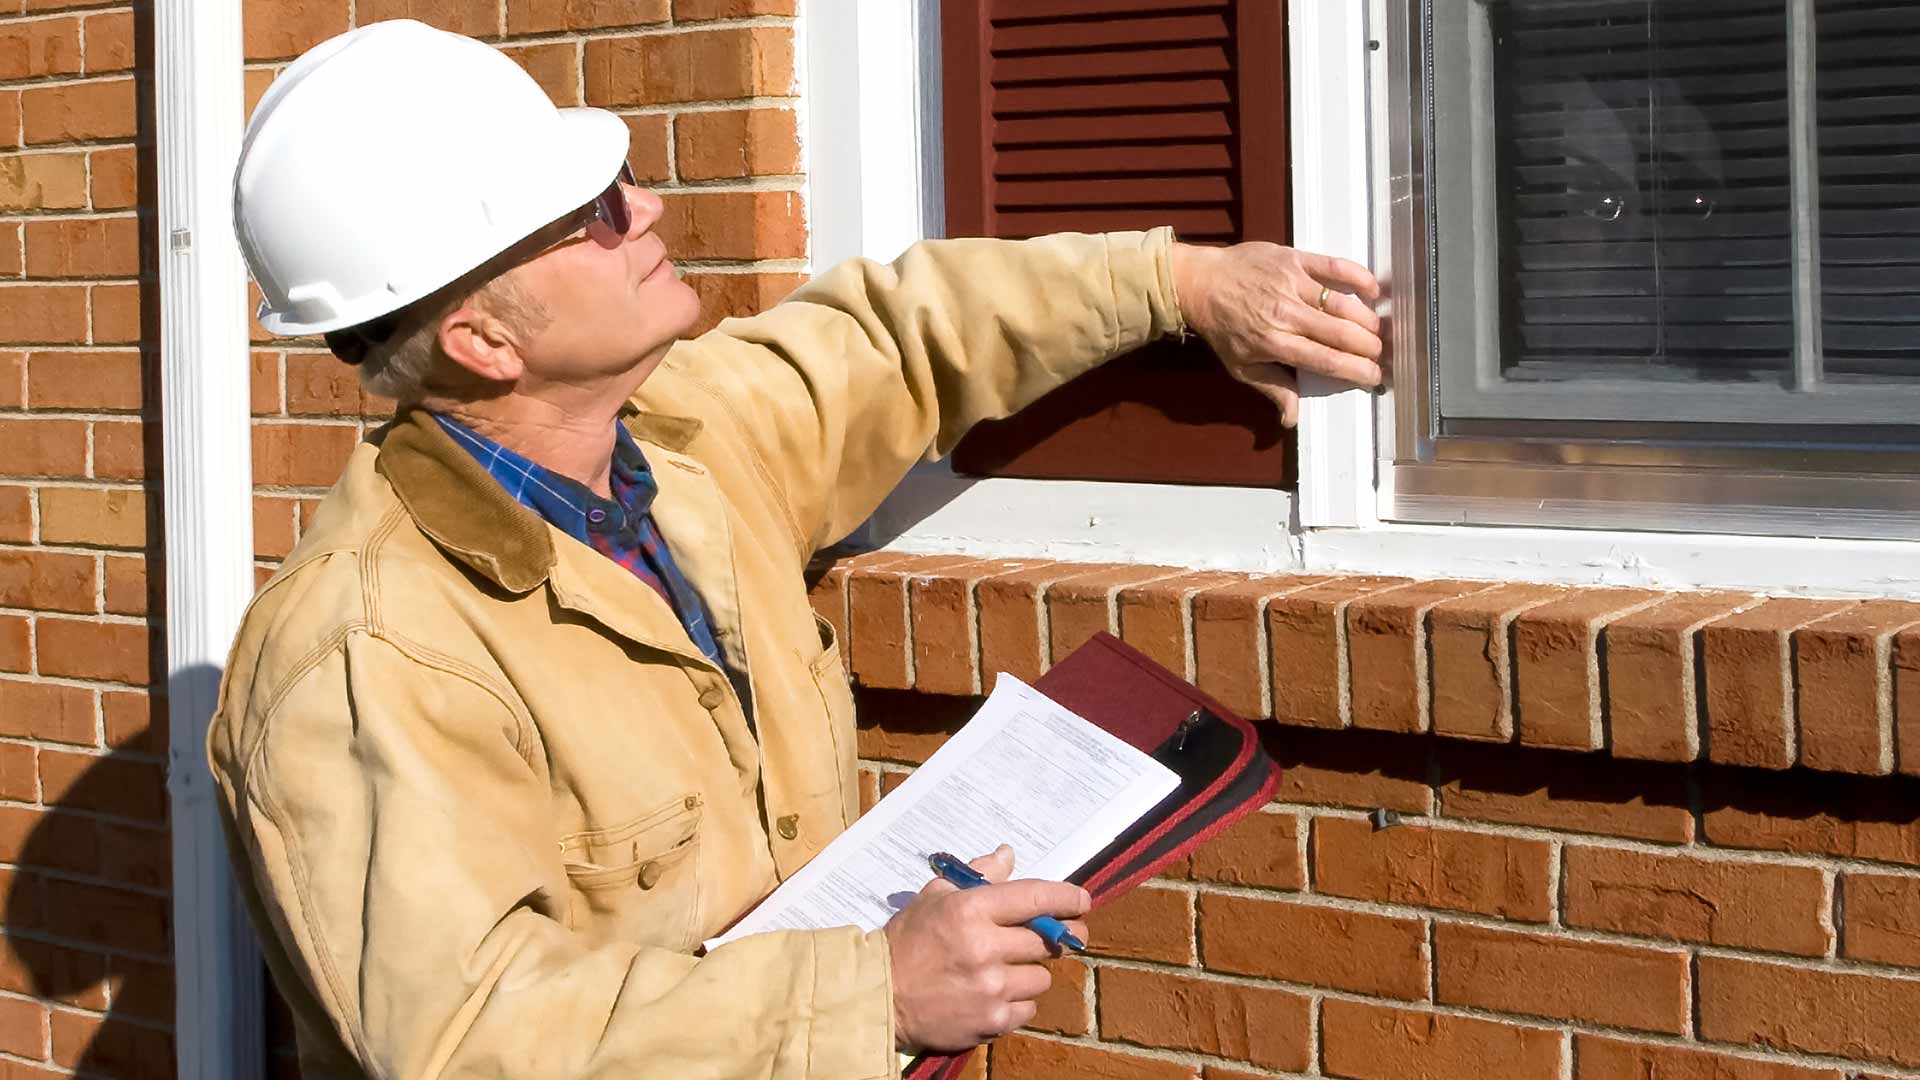 Home inspector checking windows on the outside of home and making notes on his clipboard.